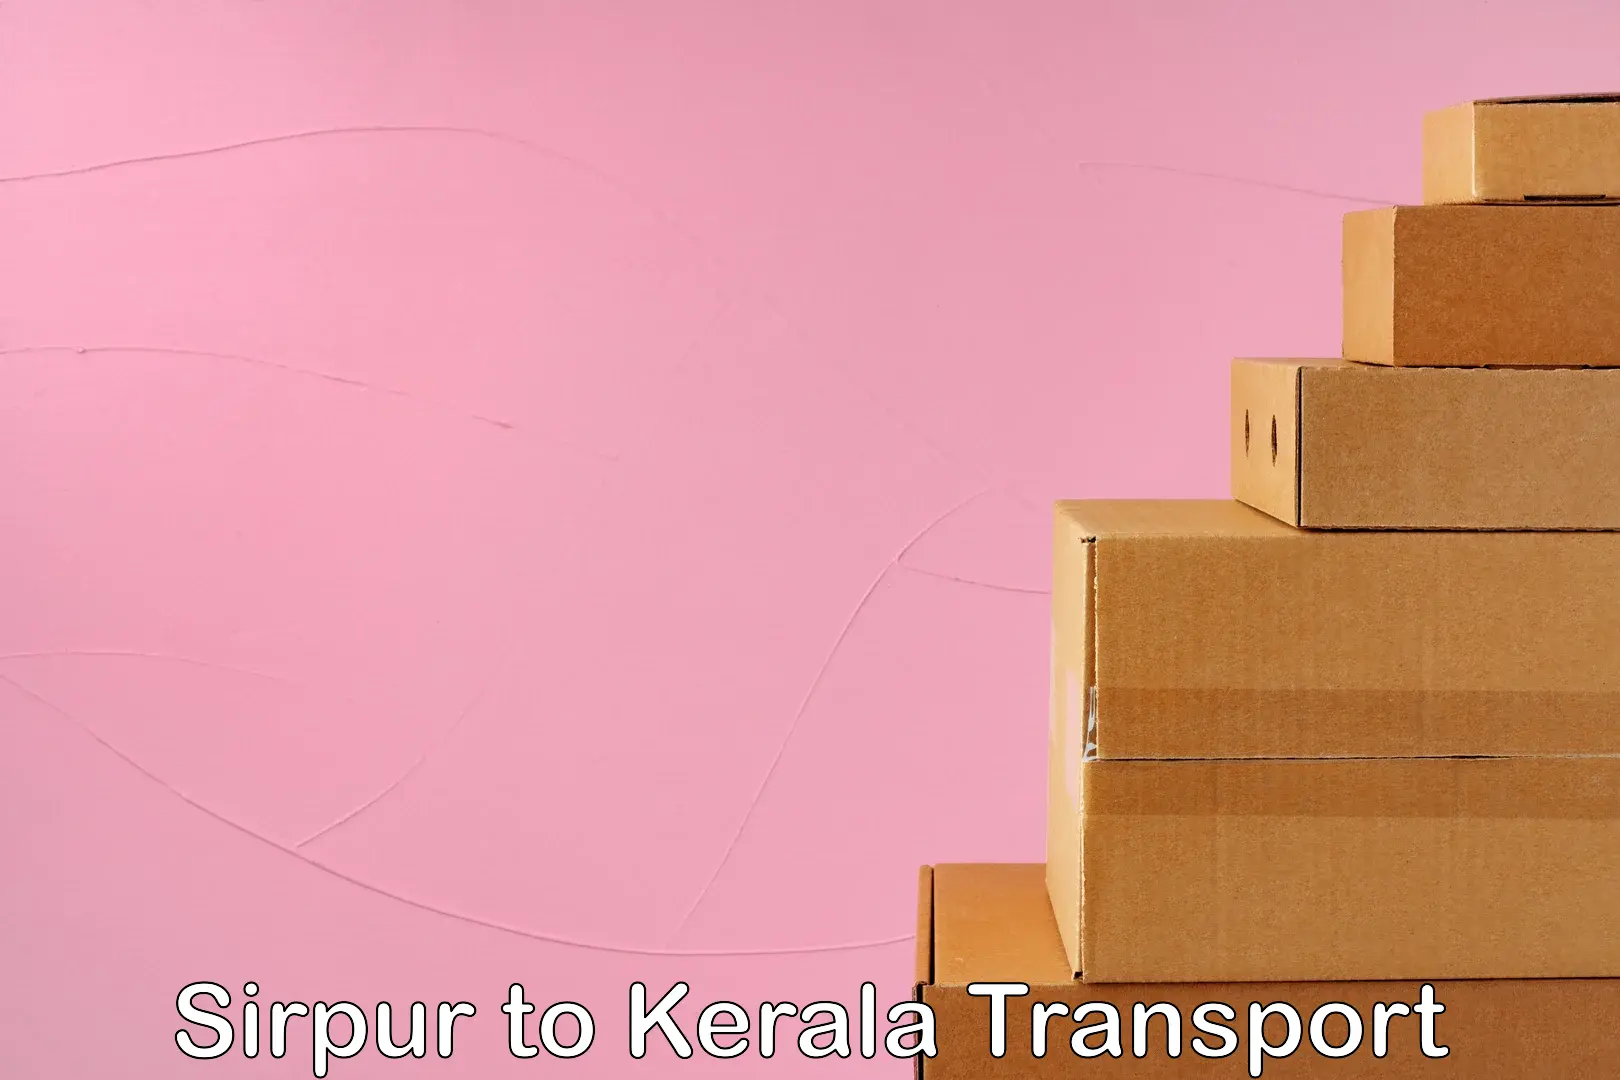 Truck transport companies in India Sirpur to Kilimanoor